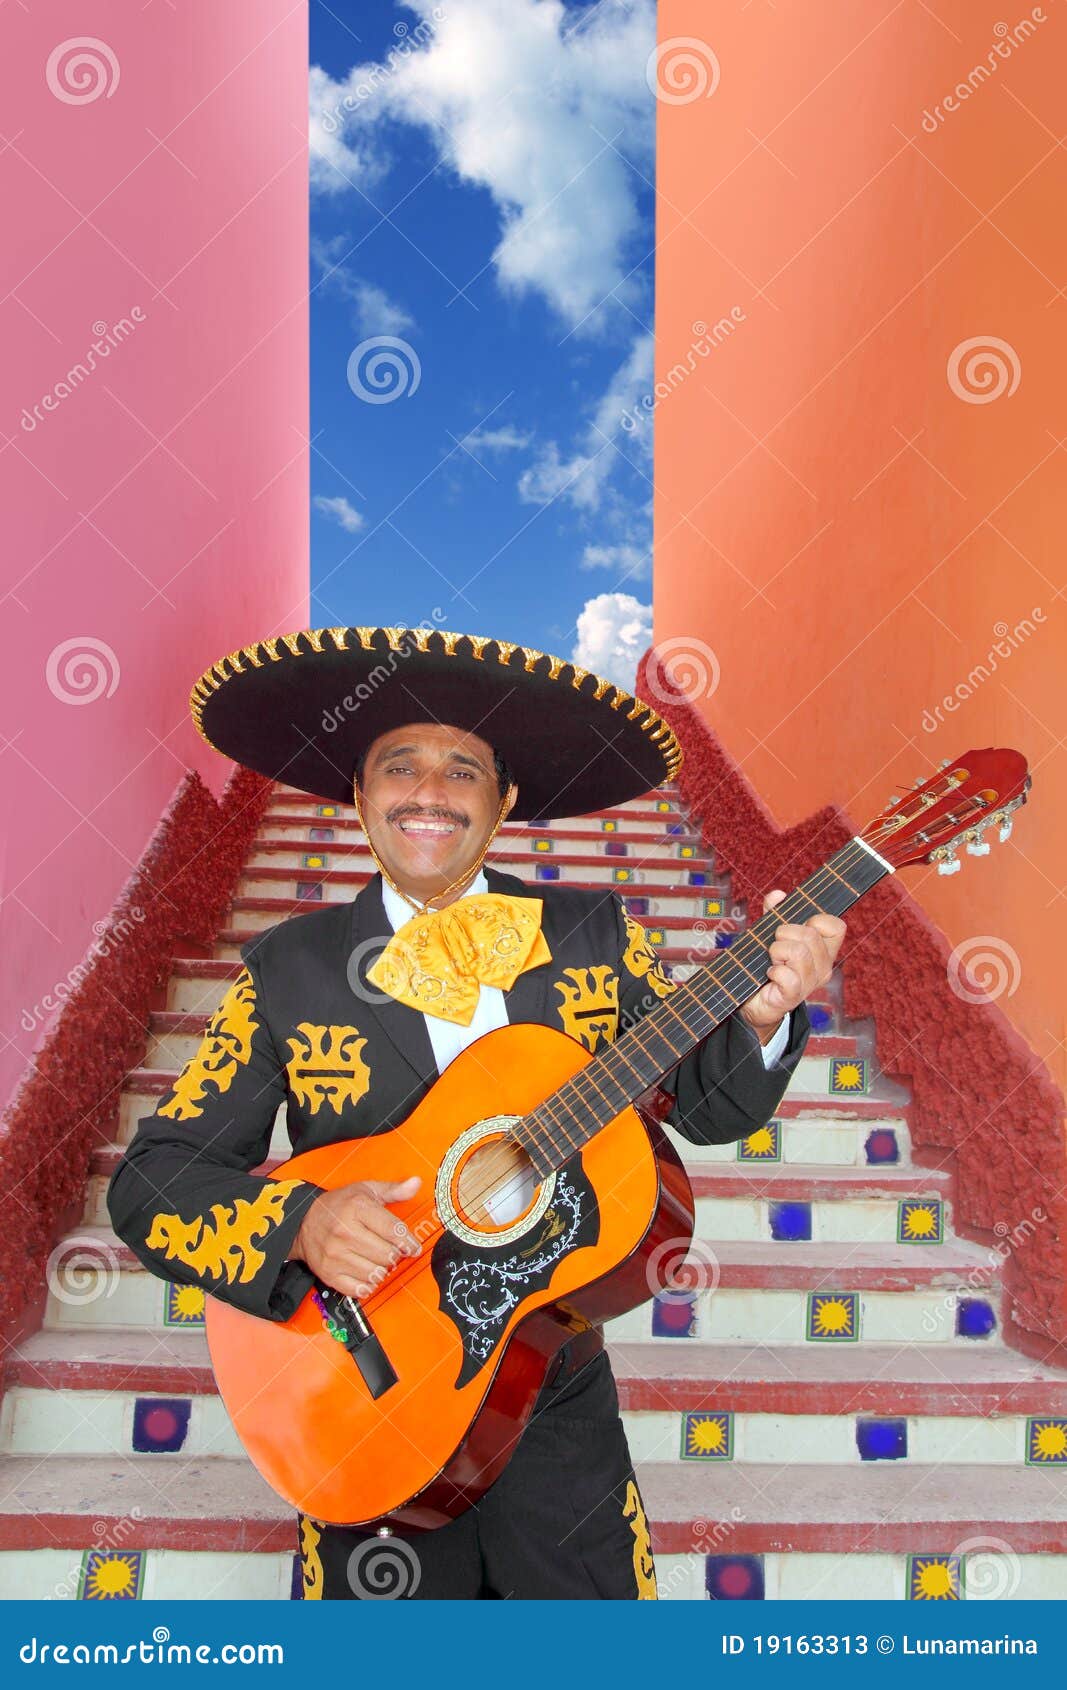 charro mariachi playing guitar in mexico stairway